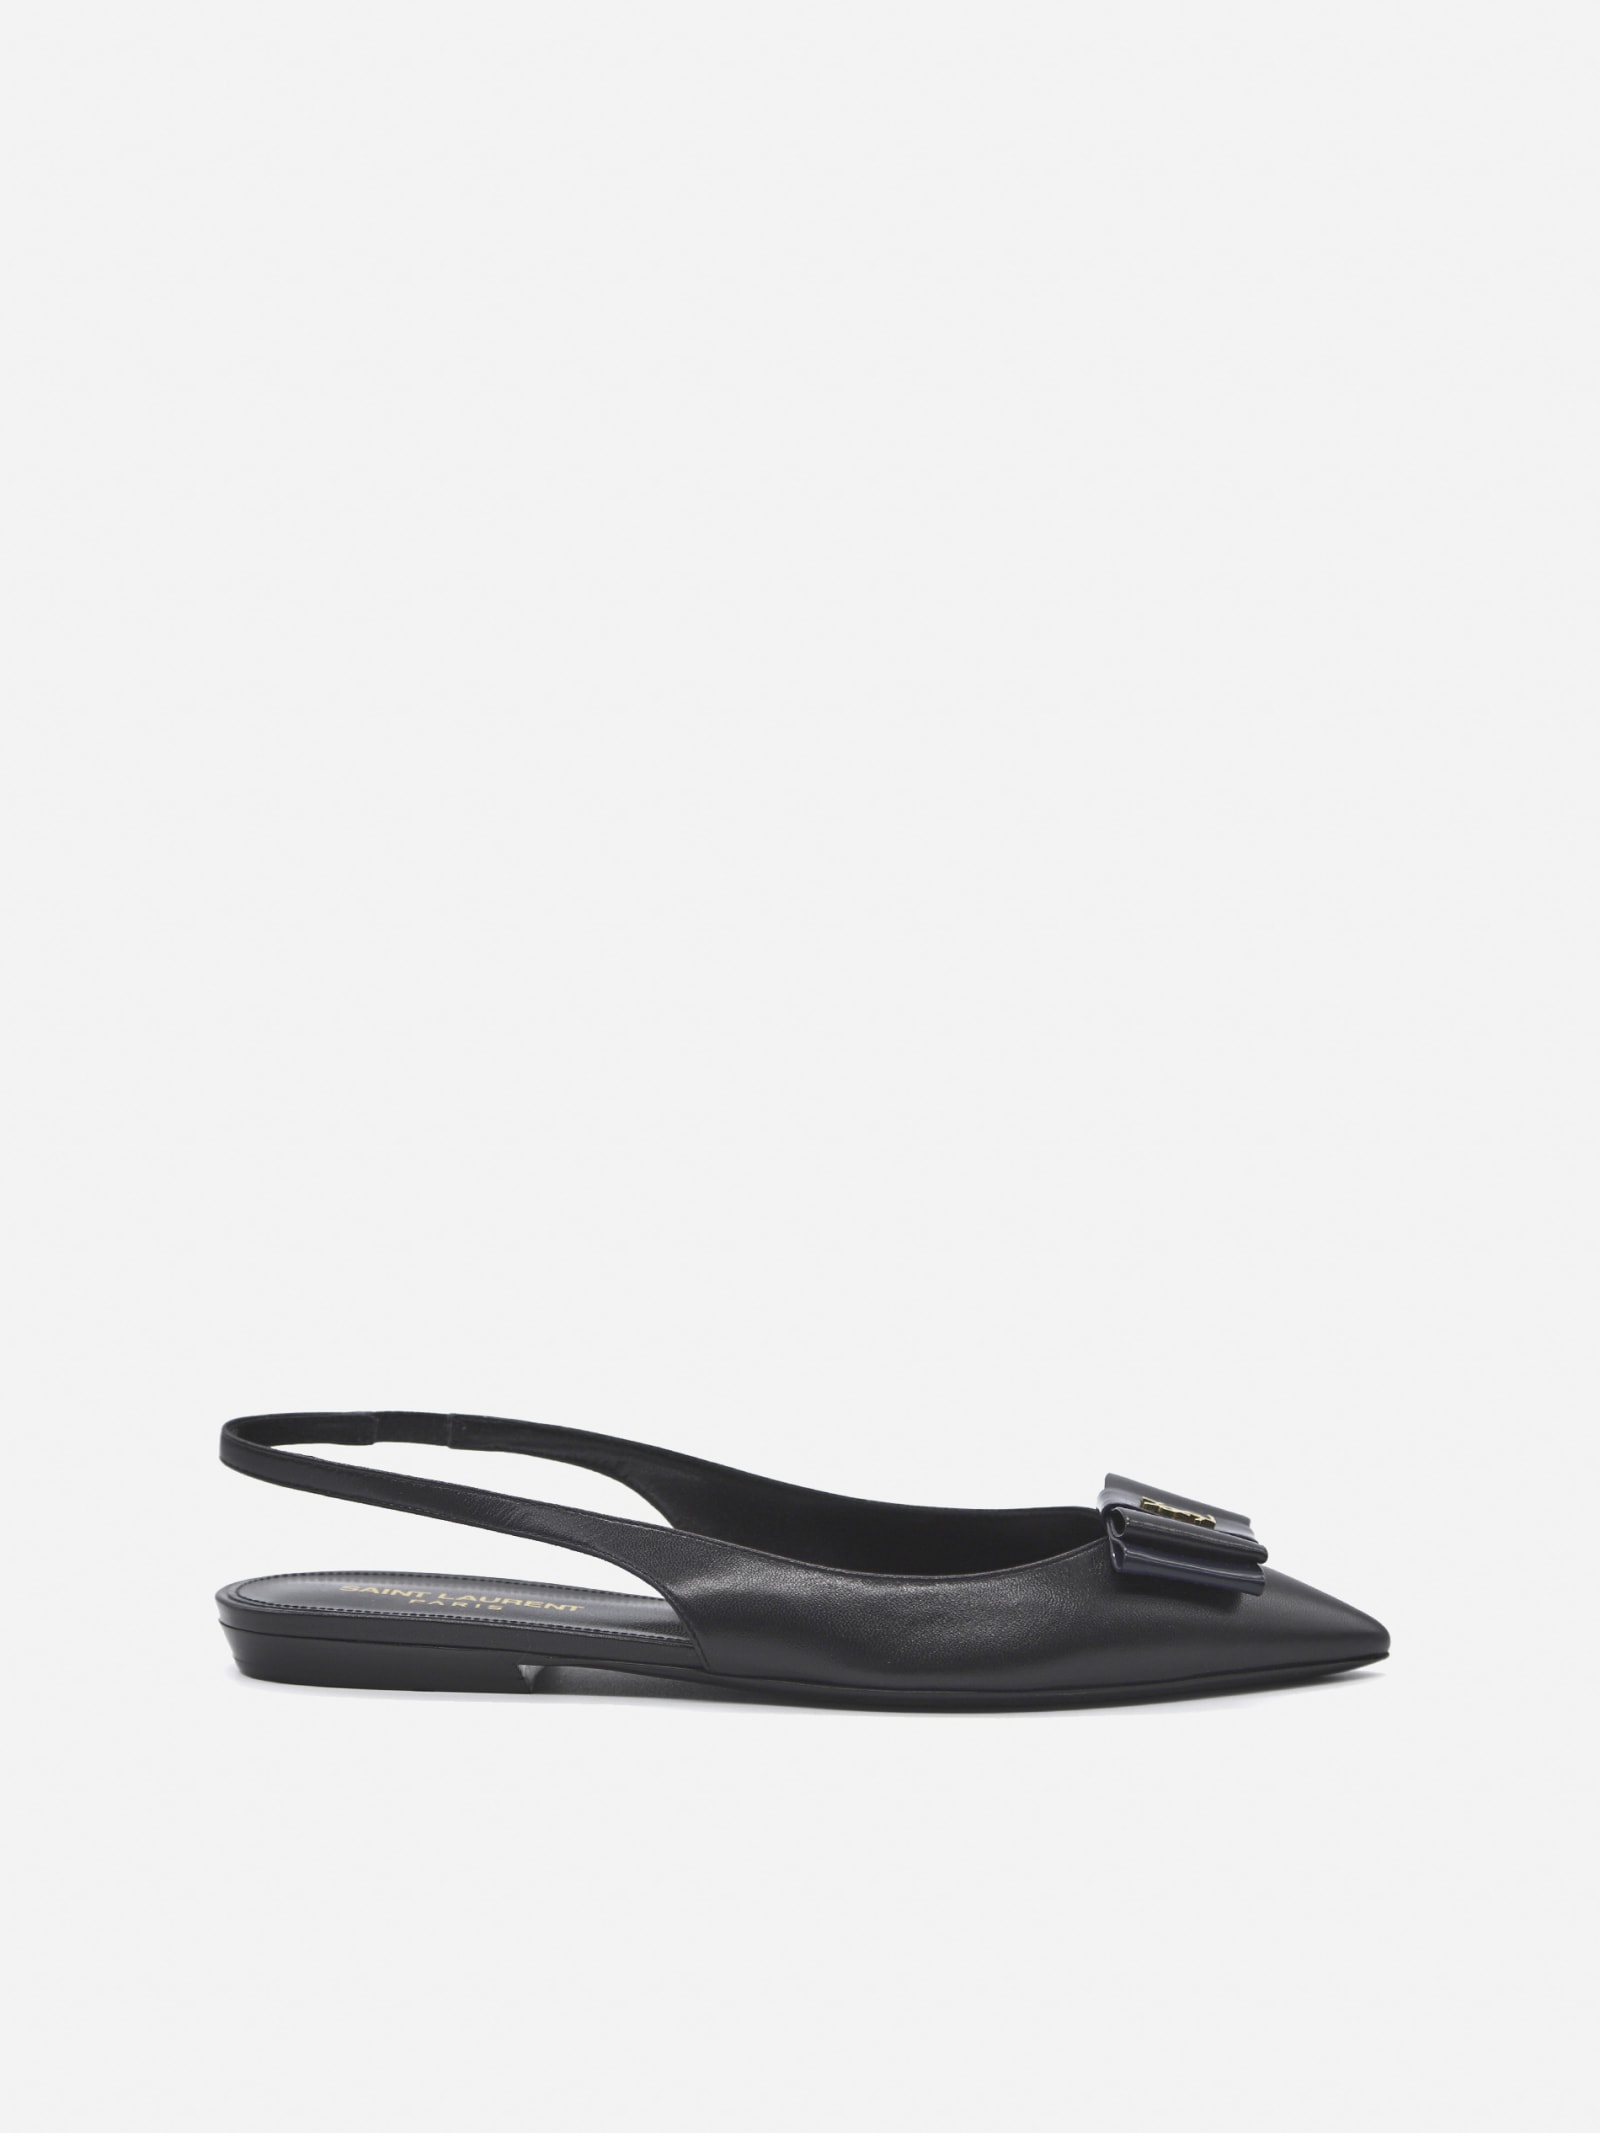 Saint Laurent Ana? Flat D?ollet?In Leather With Monogram Detail